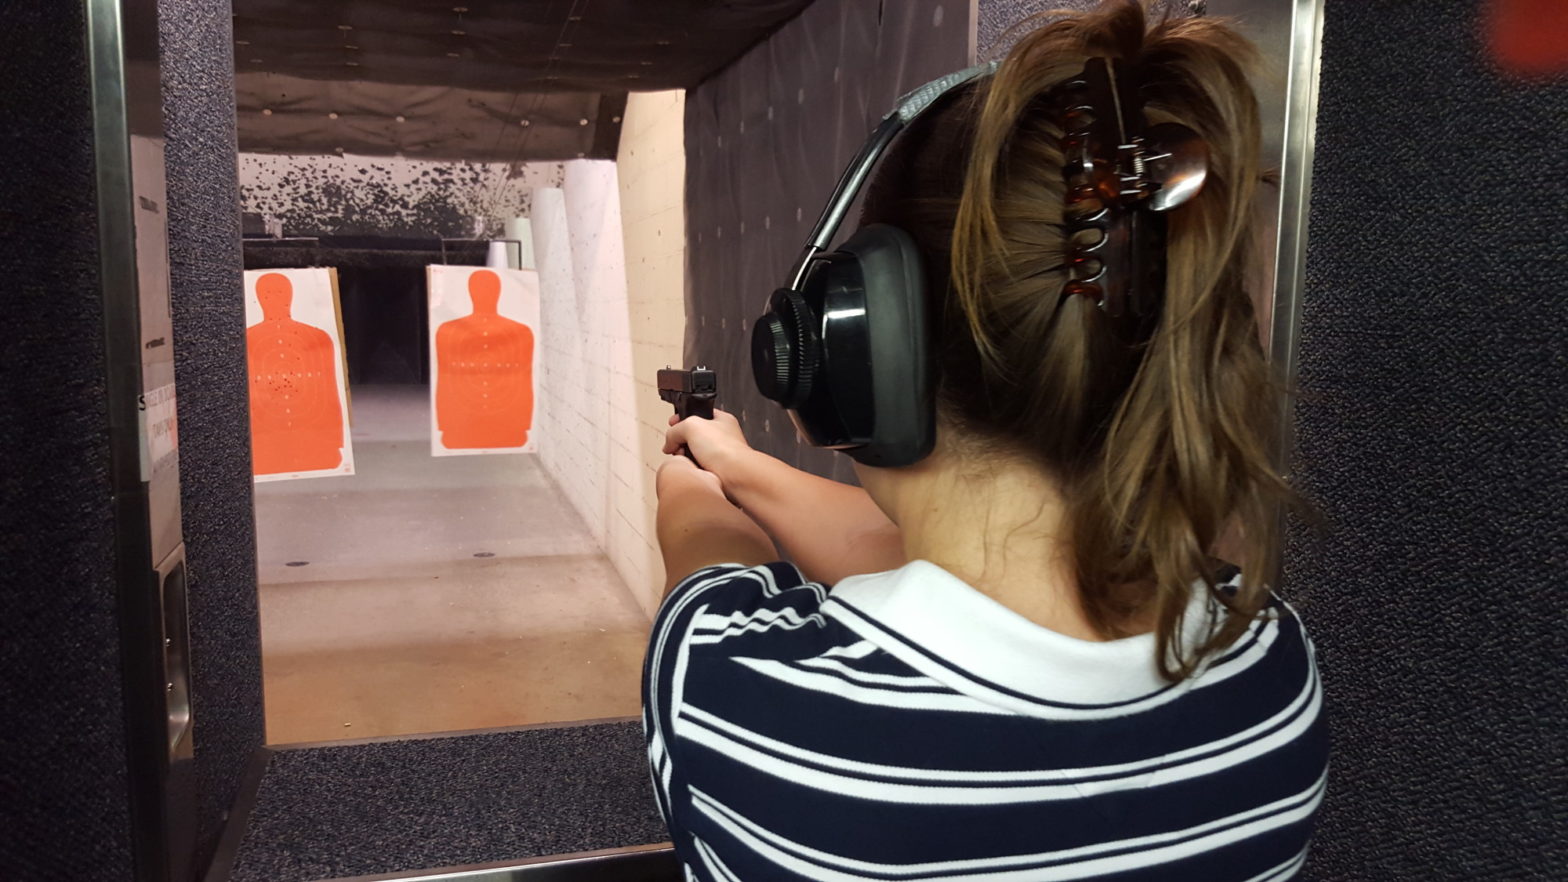 You should know this about your friend before you go to the range